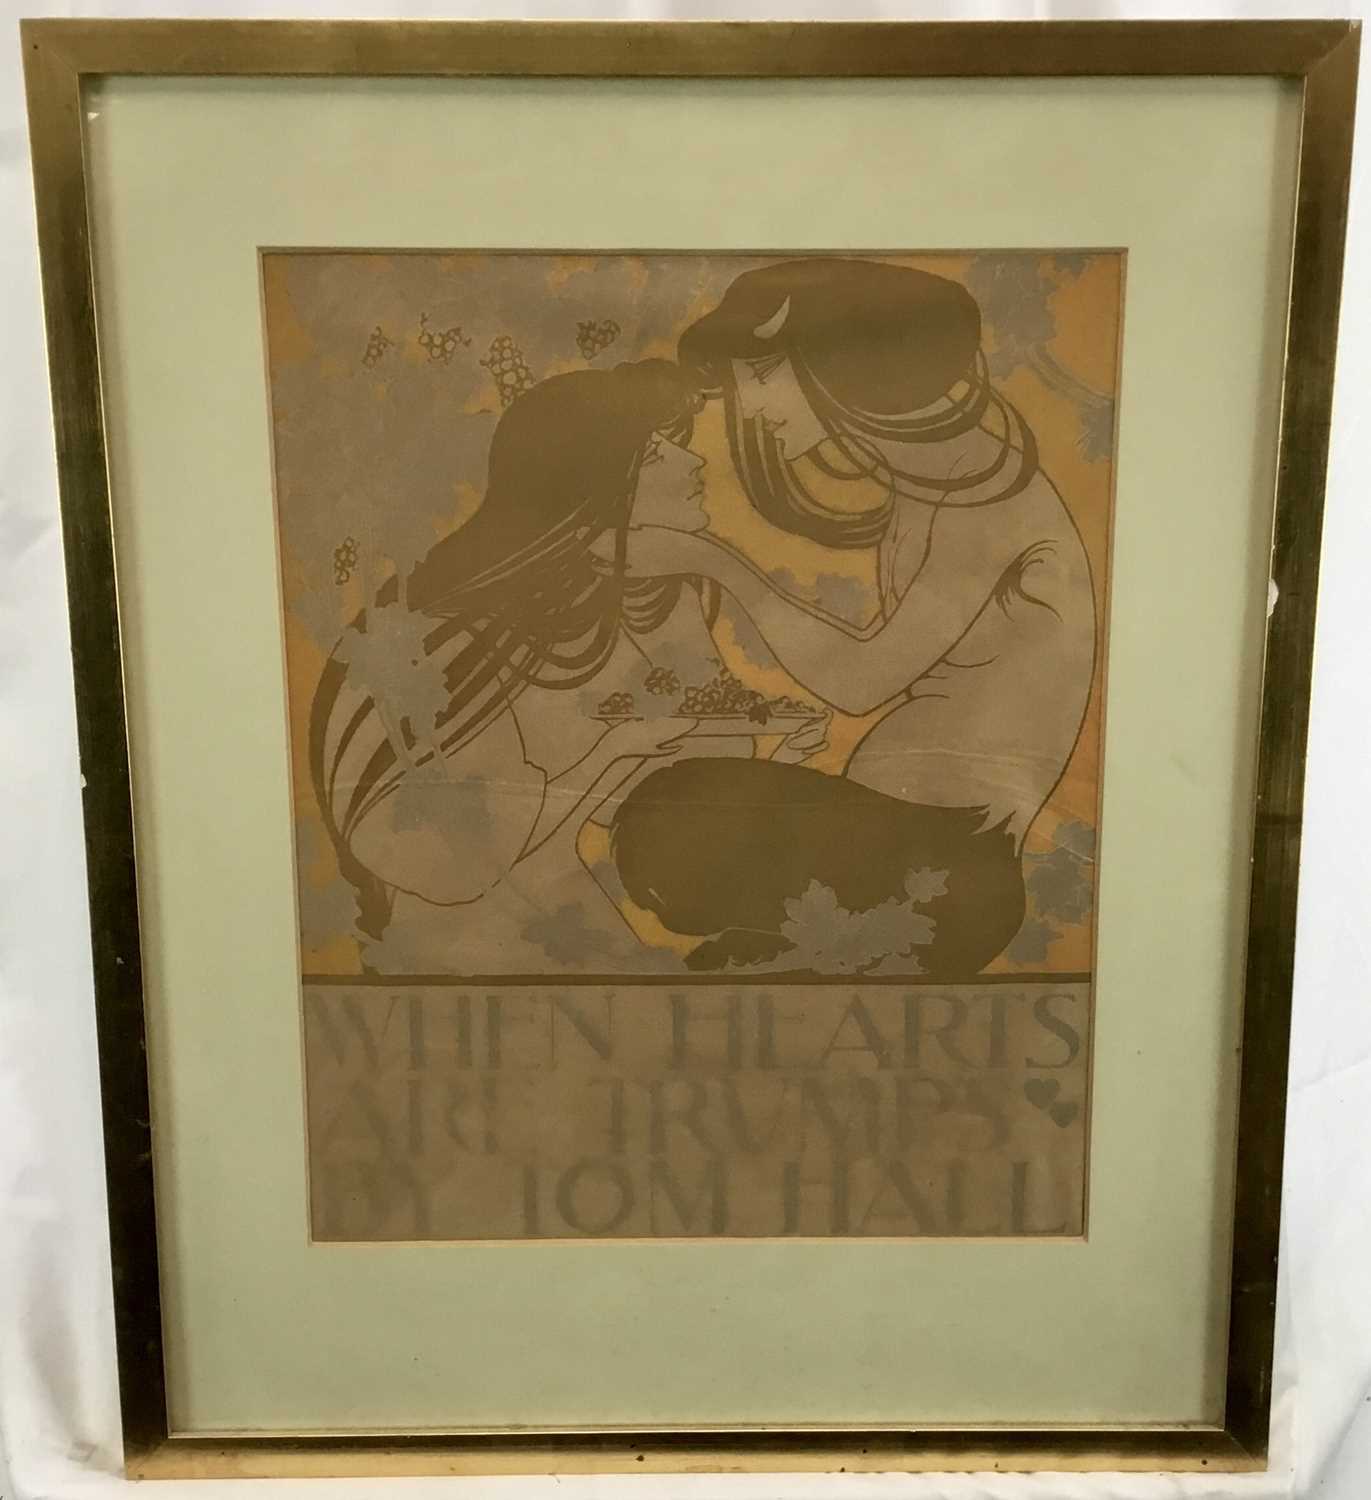 Lot 125 - After William H. Bradley Art Nouveau lithograph - ‘When Hearts are Trumps by Tom Hall’ 33cm x 41cm in glazed frame